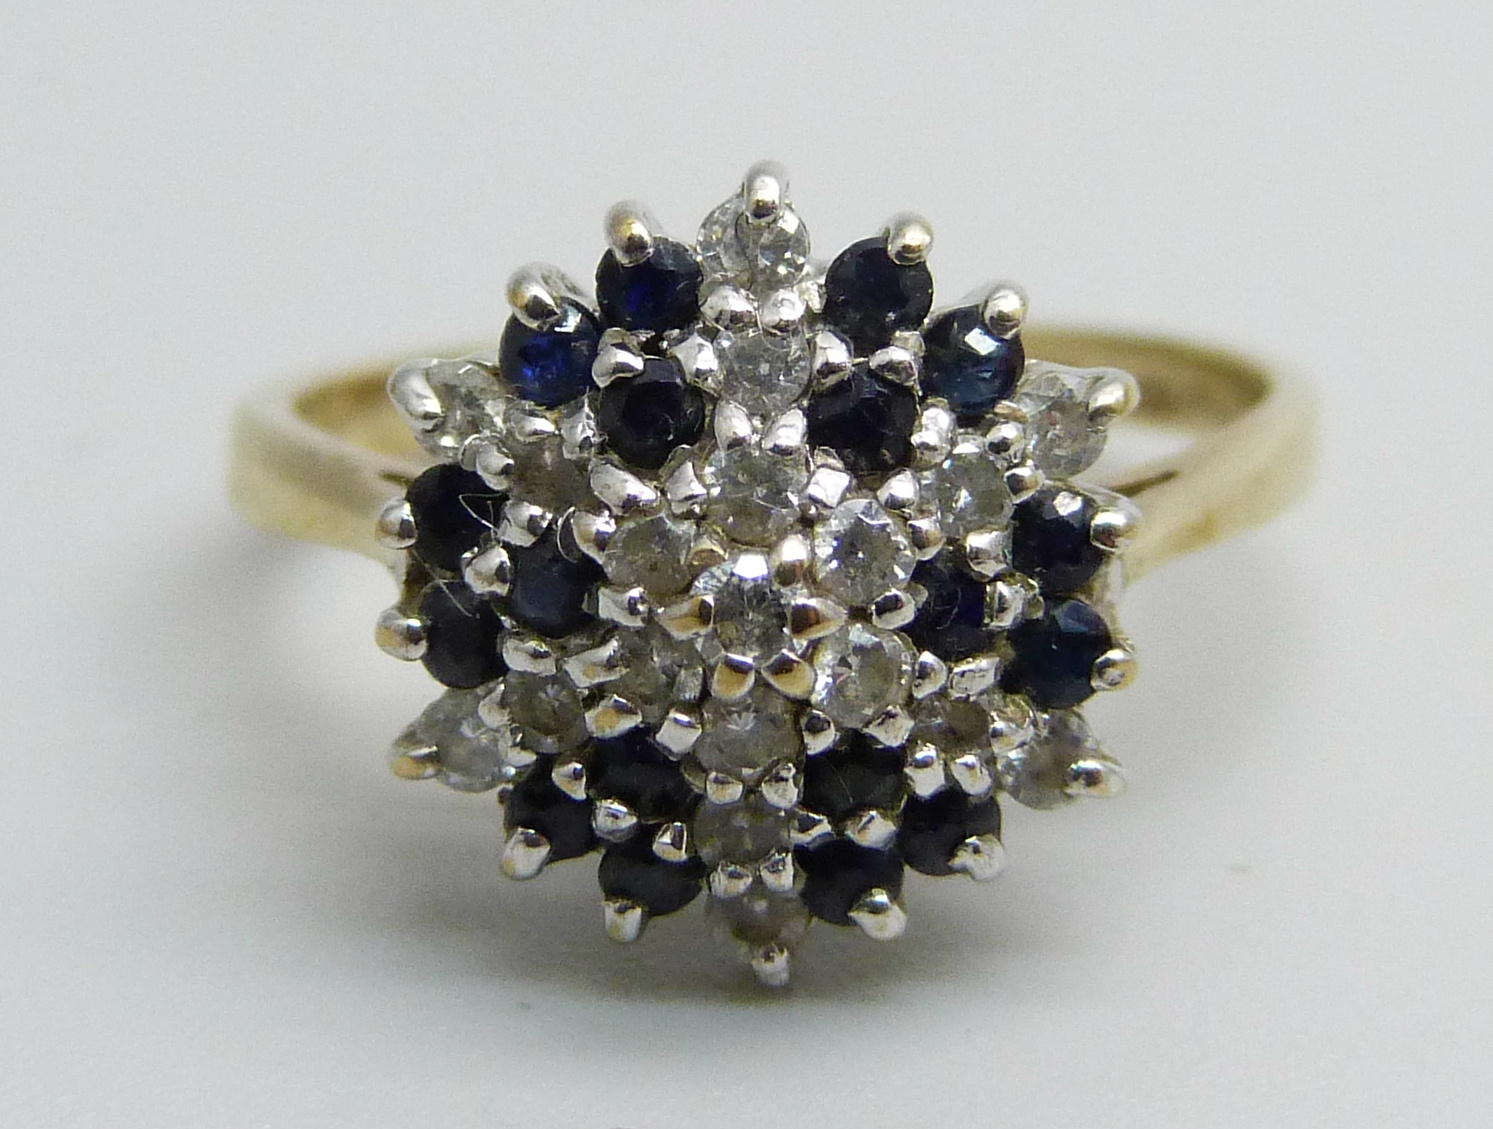 A 9ct gold, sapphire and cubic zirconia ring, 2.3g, K